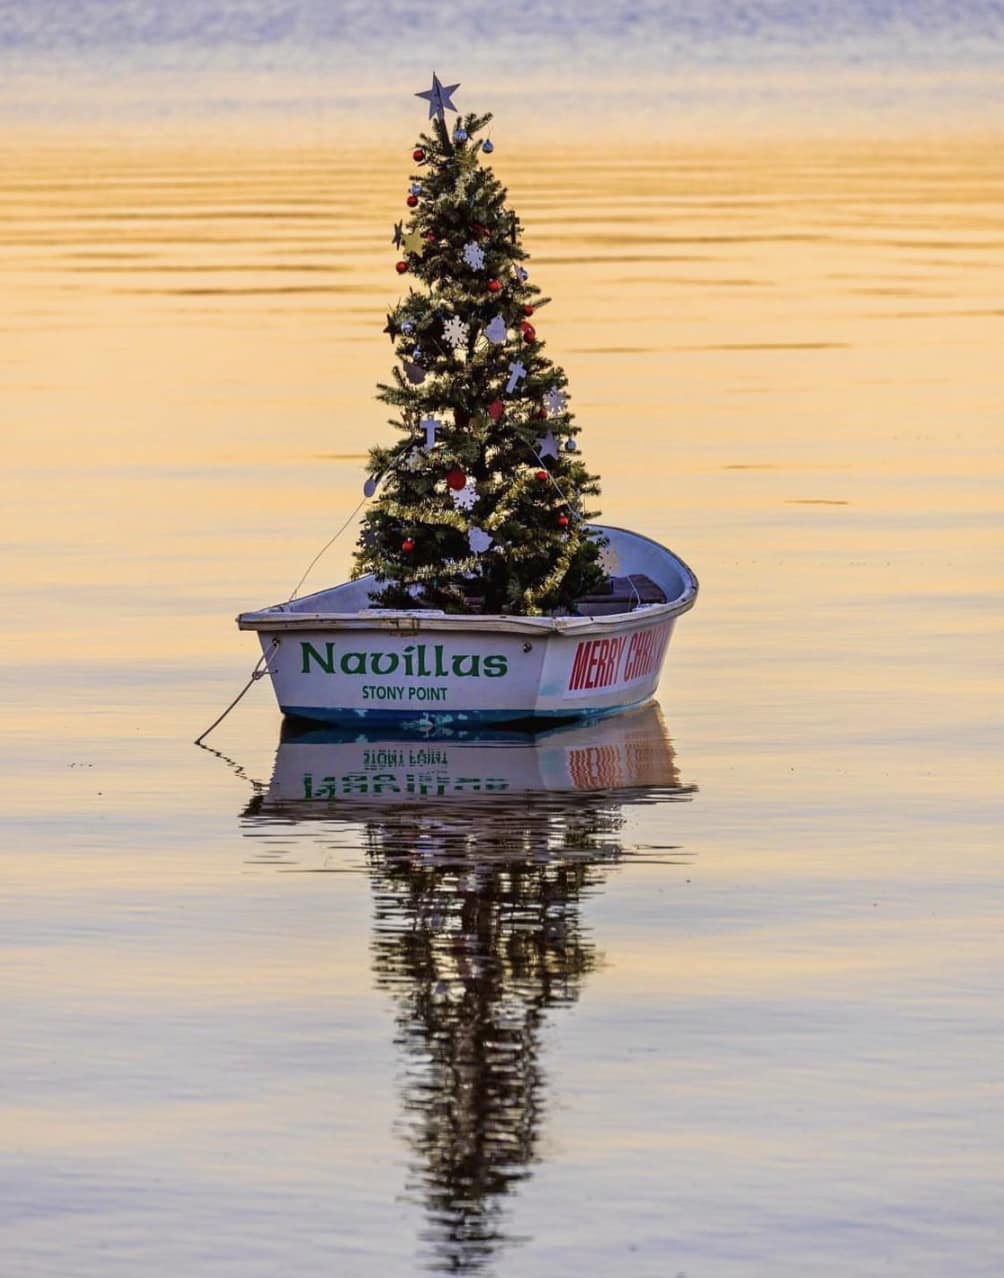 A Christmas tree on a boat